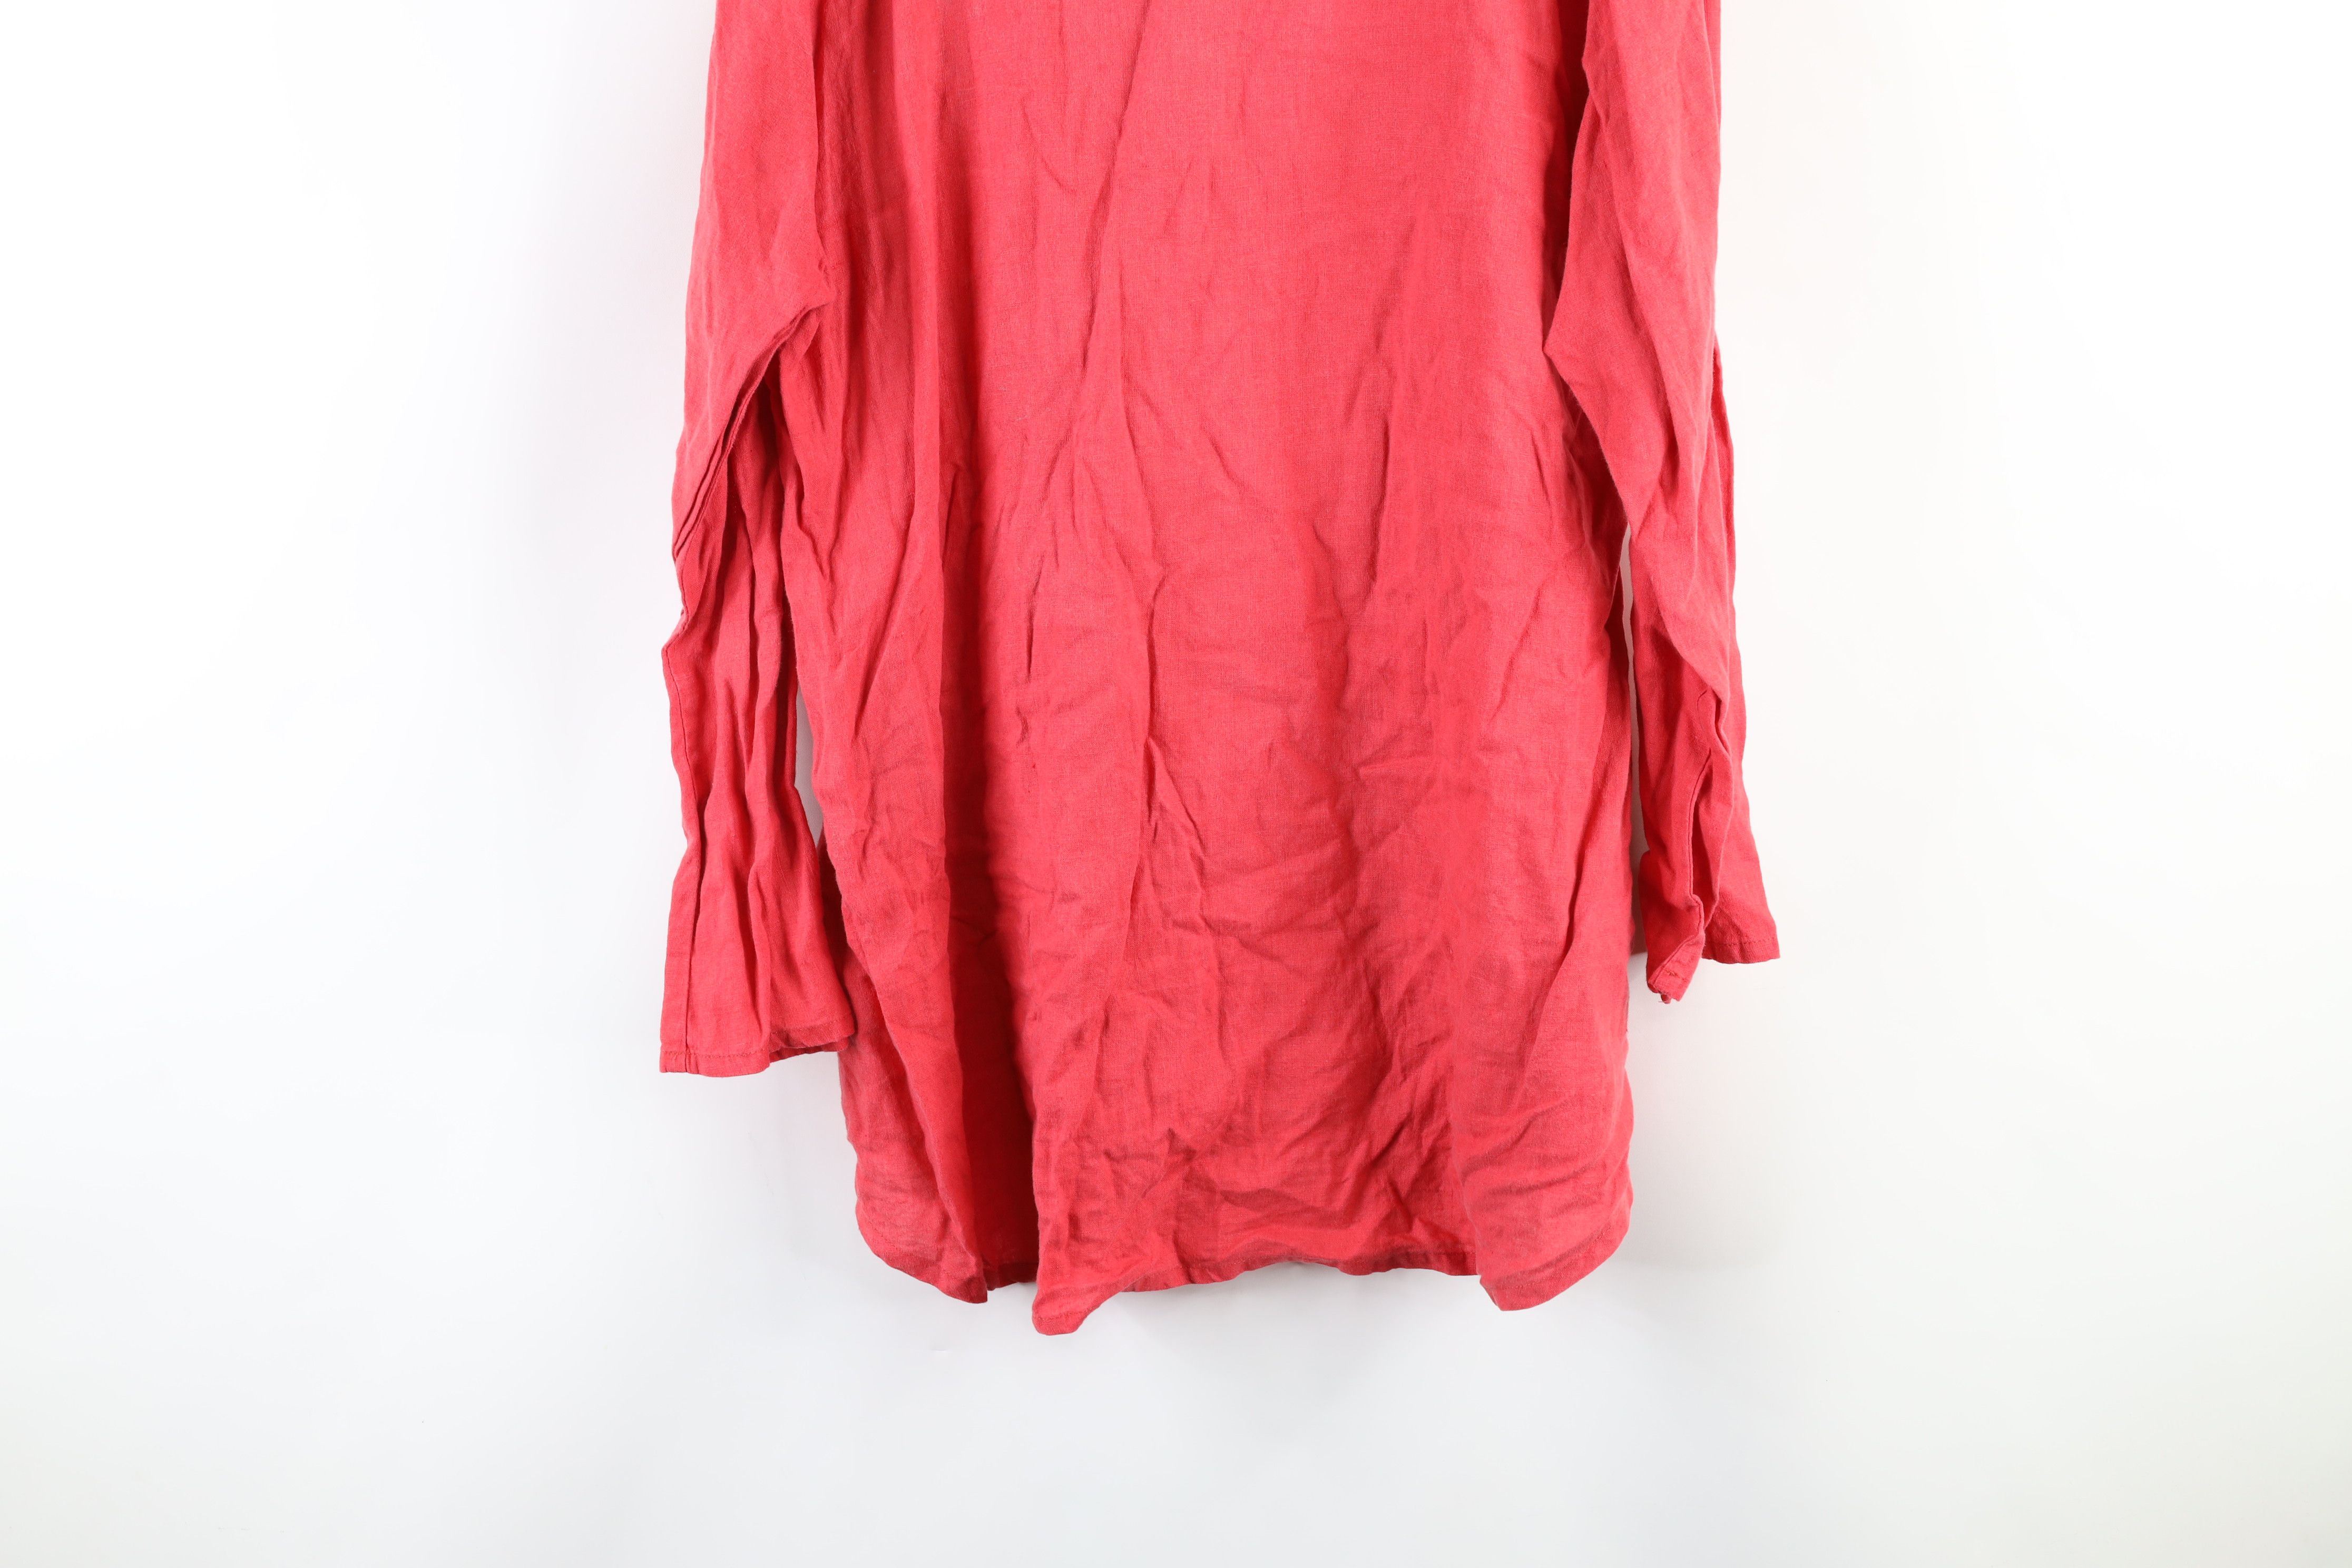 Vintage Vintage Flax Blank Lagenlook Baggy Fit Hoodie Red Linen Size M / US 6-8 / IT 42-44 - 11 Preview